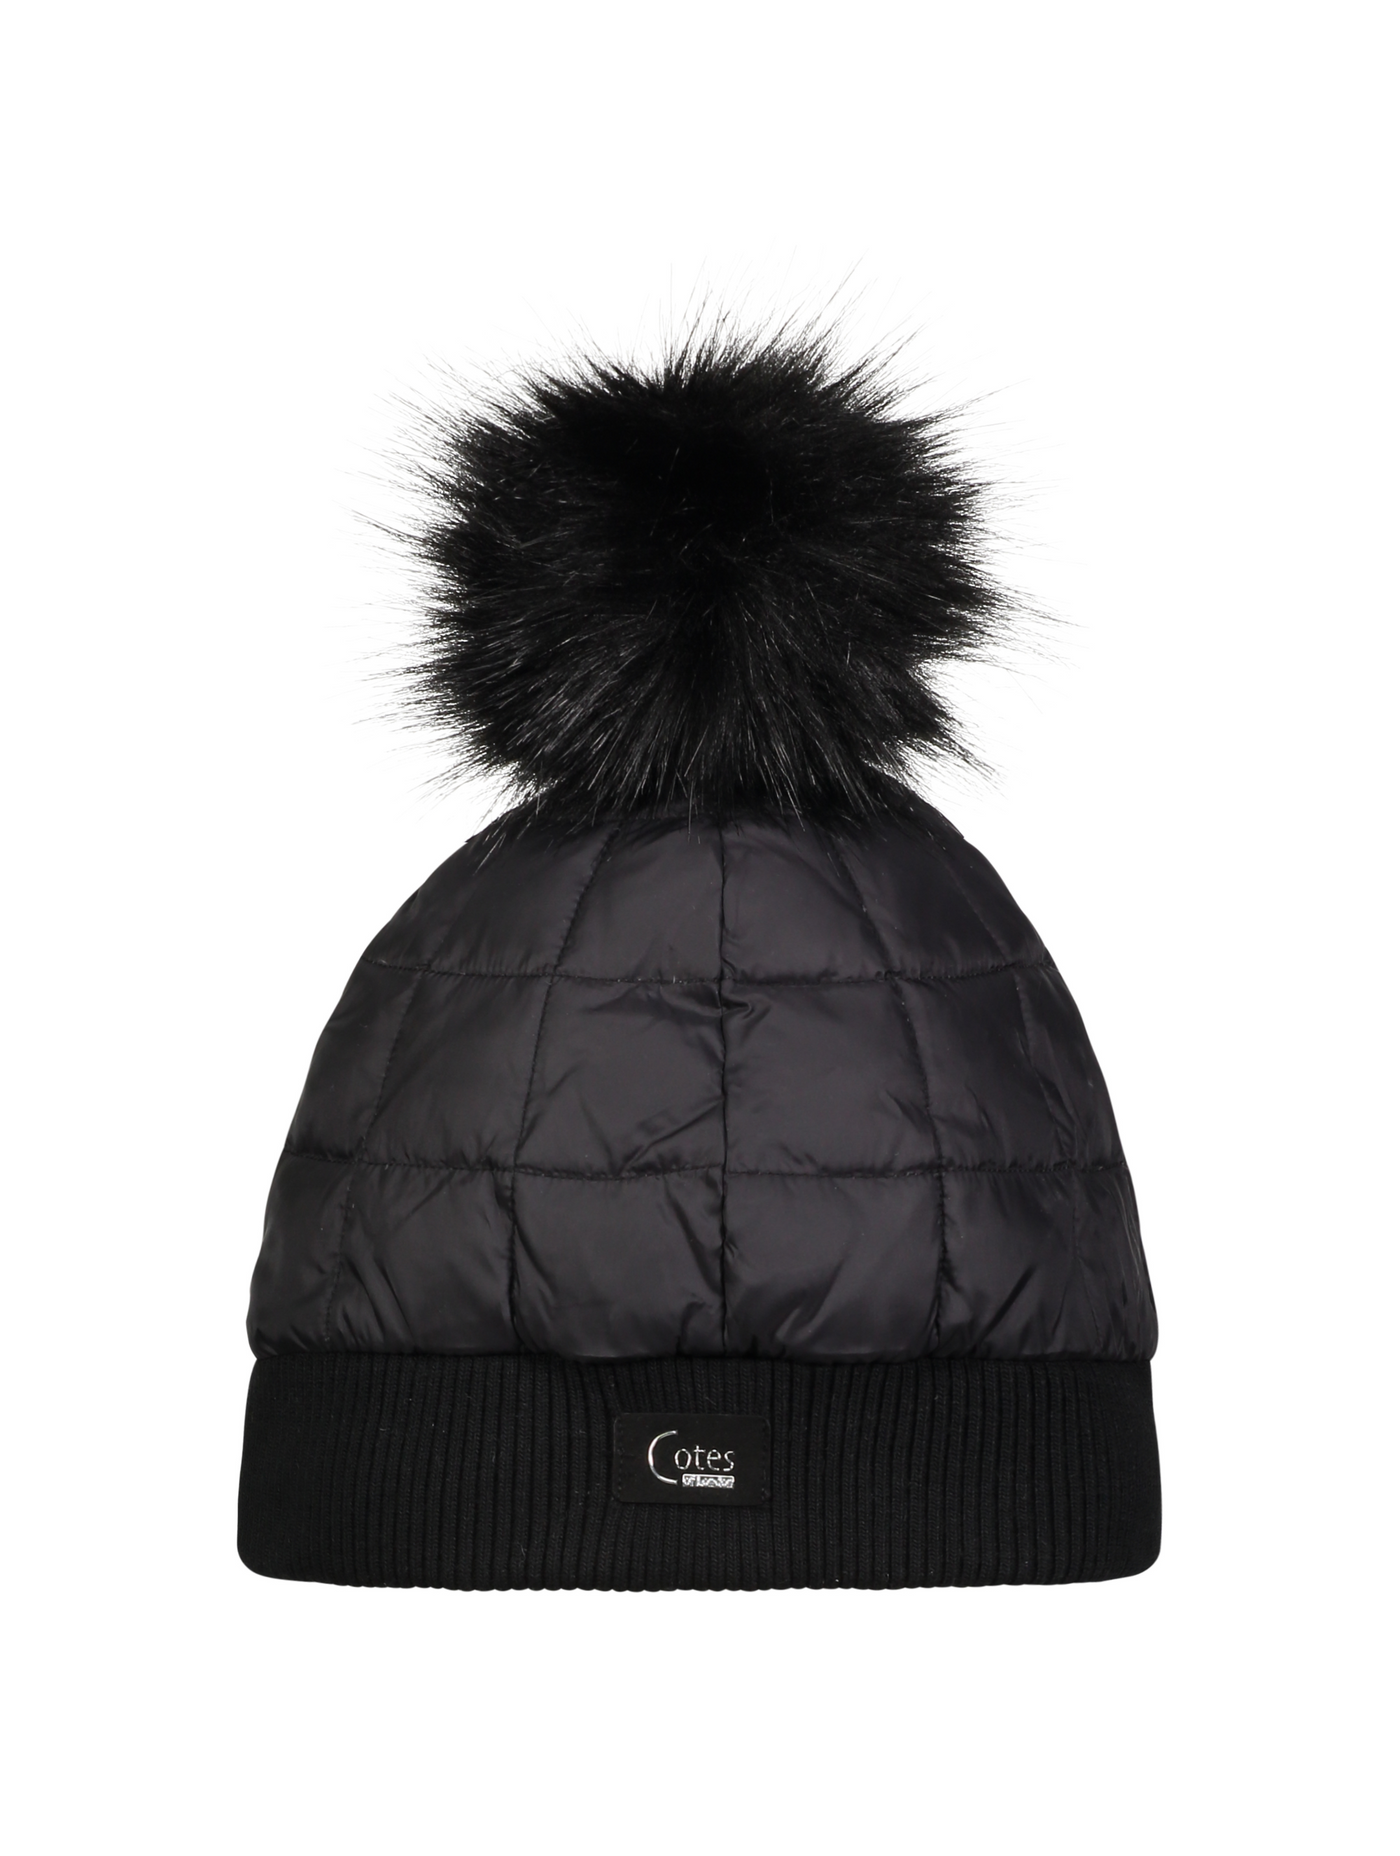 Down Hats | Down Winter Hat | The Capel | Cotes of London